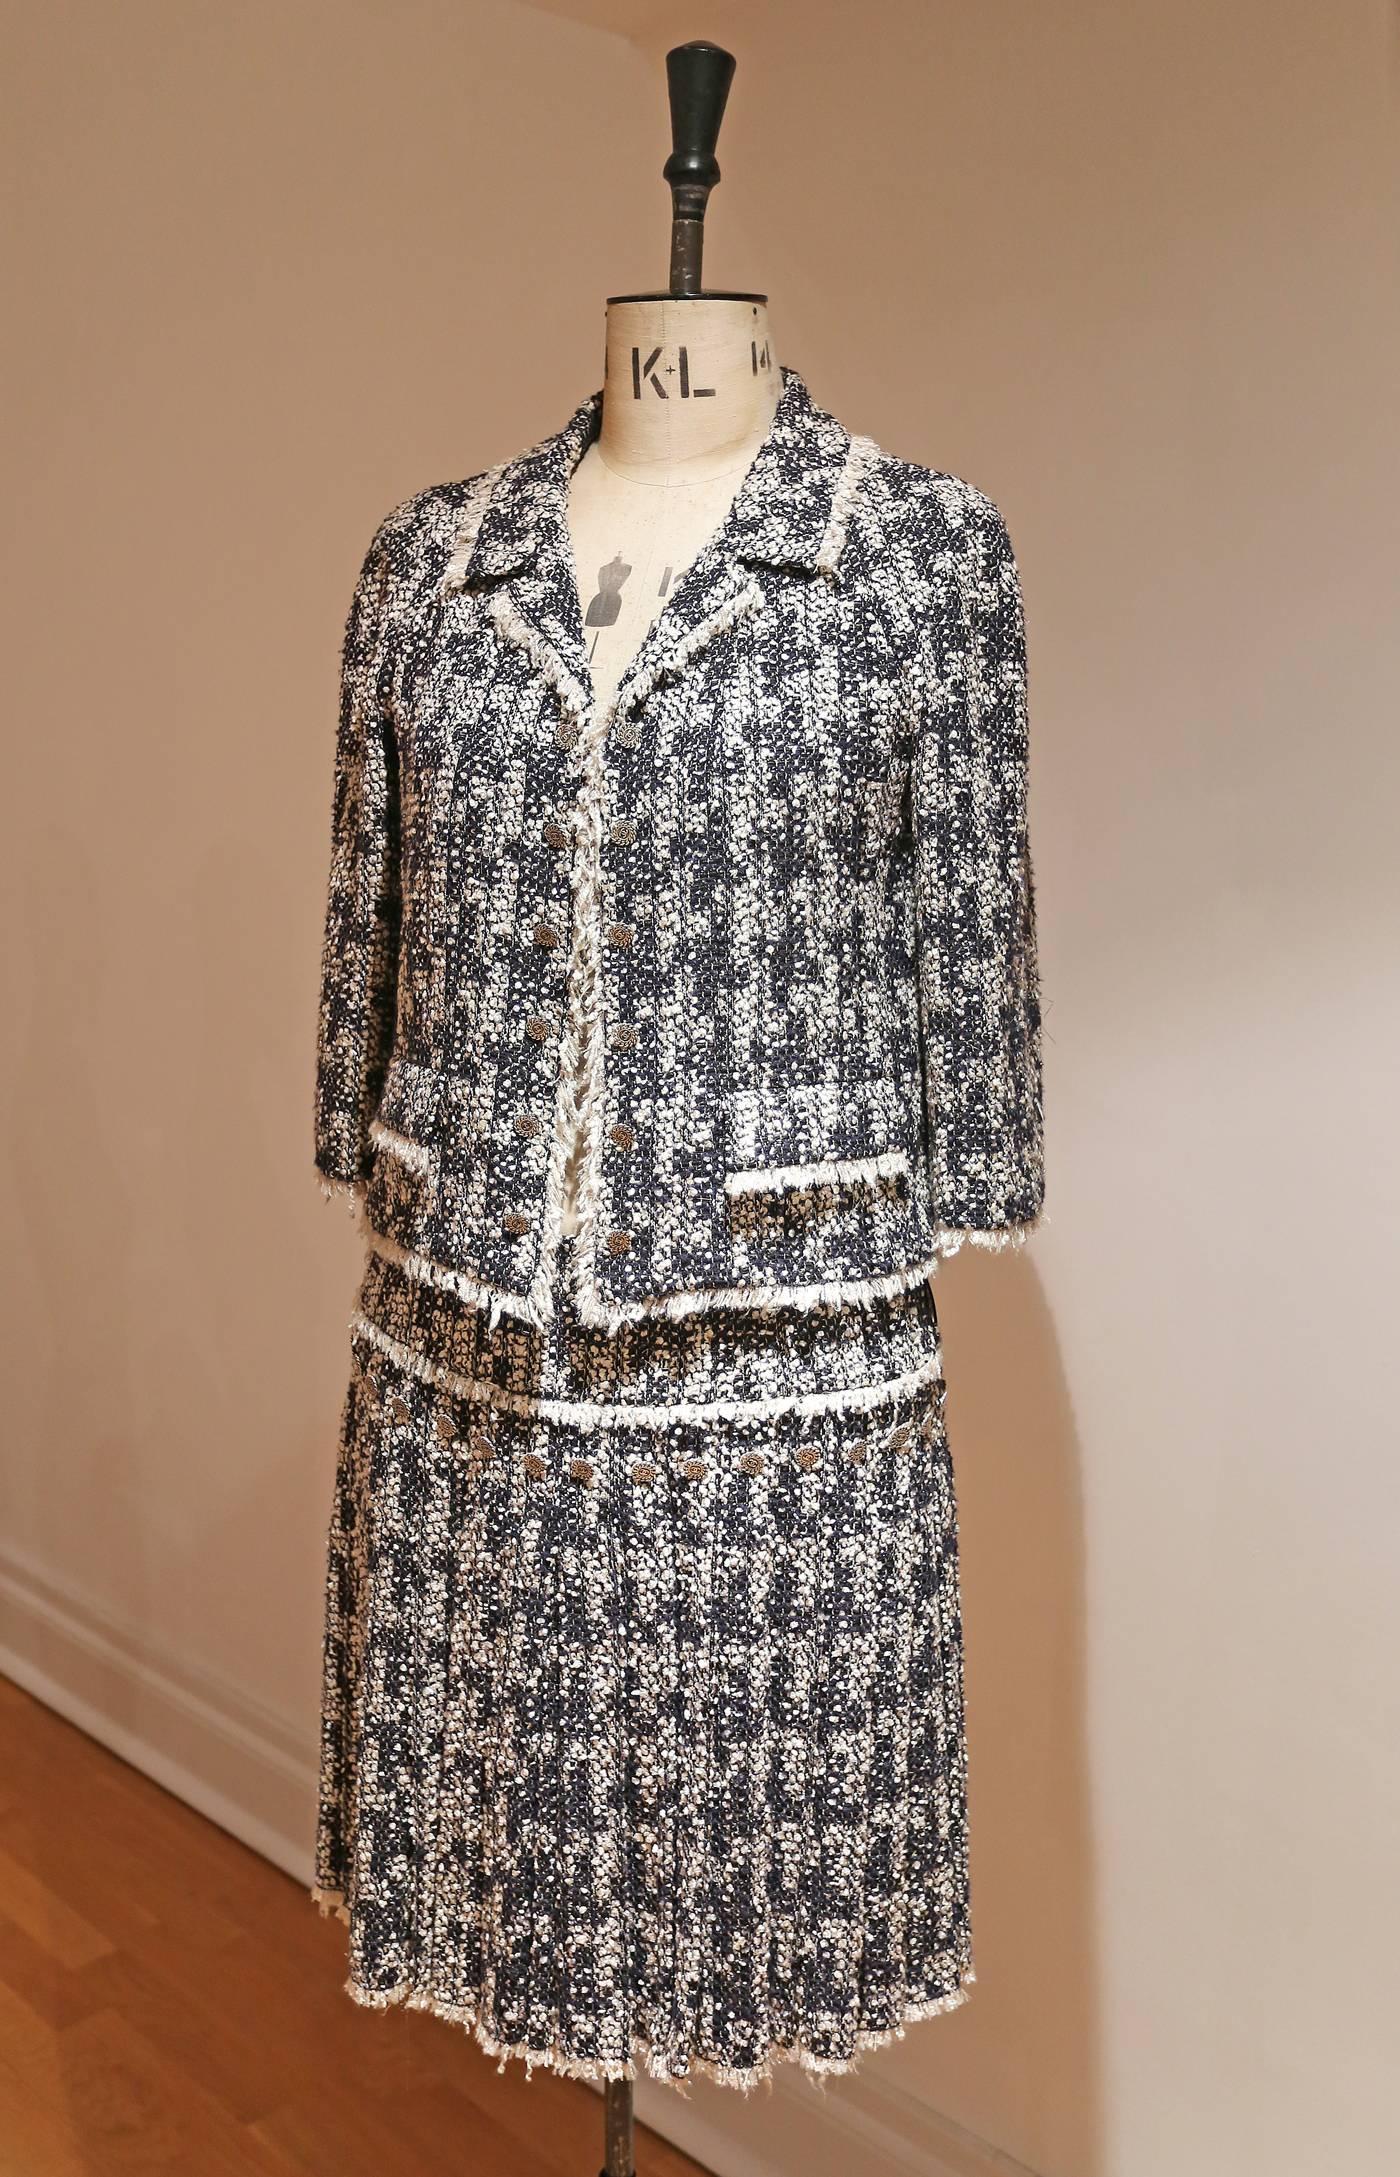 A beautiful Chanel skirt suit in metallic navy boucle tweed. The suit features and open jacket with frayed edges, silver Chanel coins and cropped sleeves and a pleated skirt which sits on the hip also with silver Chanel coins. The suit is lined in